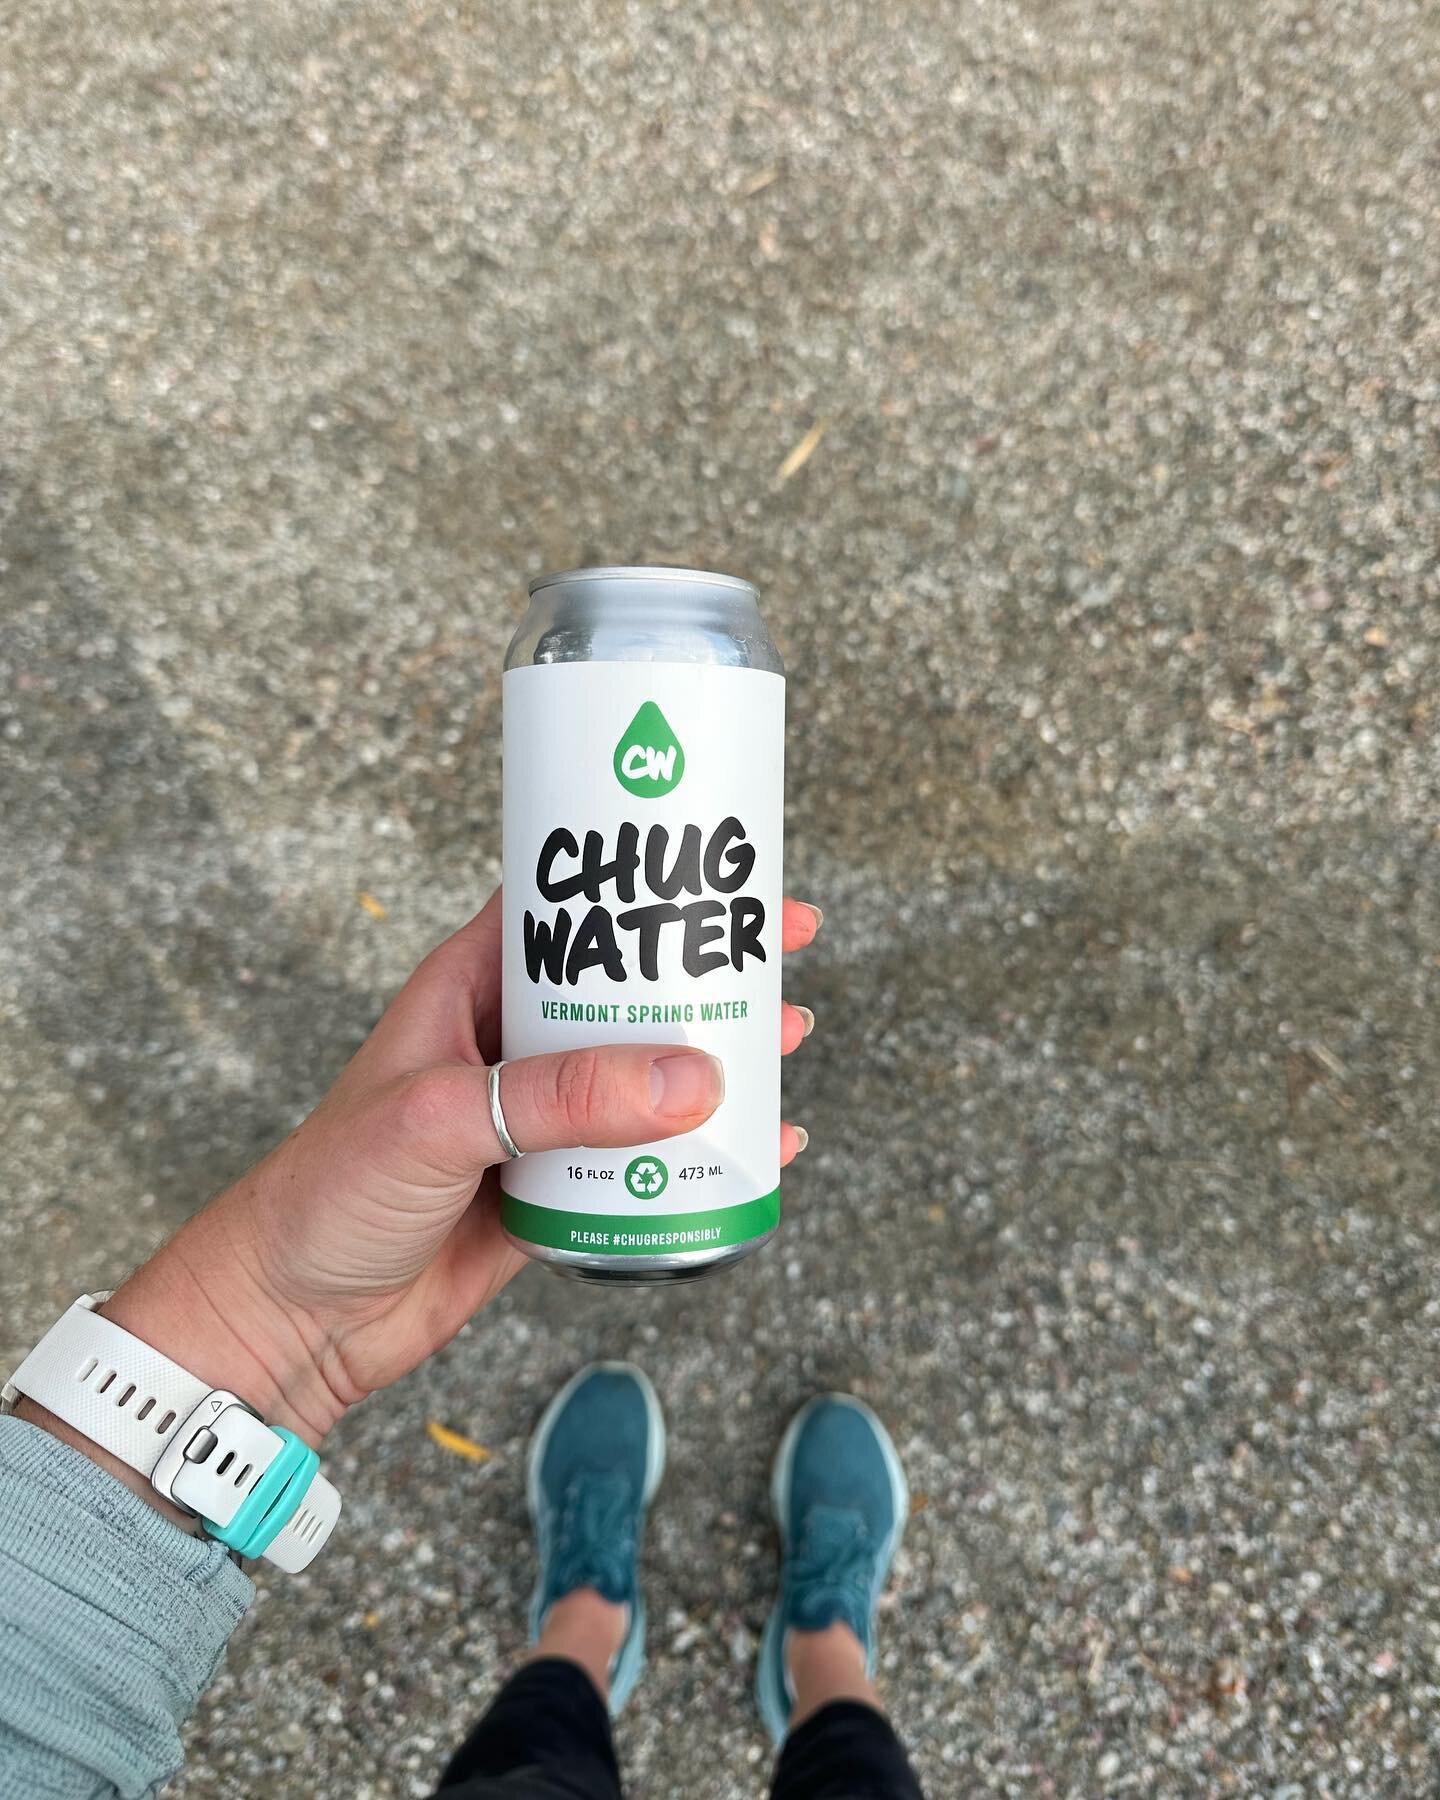 Pro Tip: forget a @chug_water in your car so when you finish your run it&rsquo;s frosty cool 😎

#springwater #vermont #vermontsfinest #runvermont #chugresponsibly #chugwater